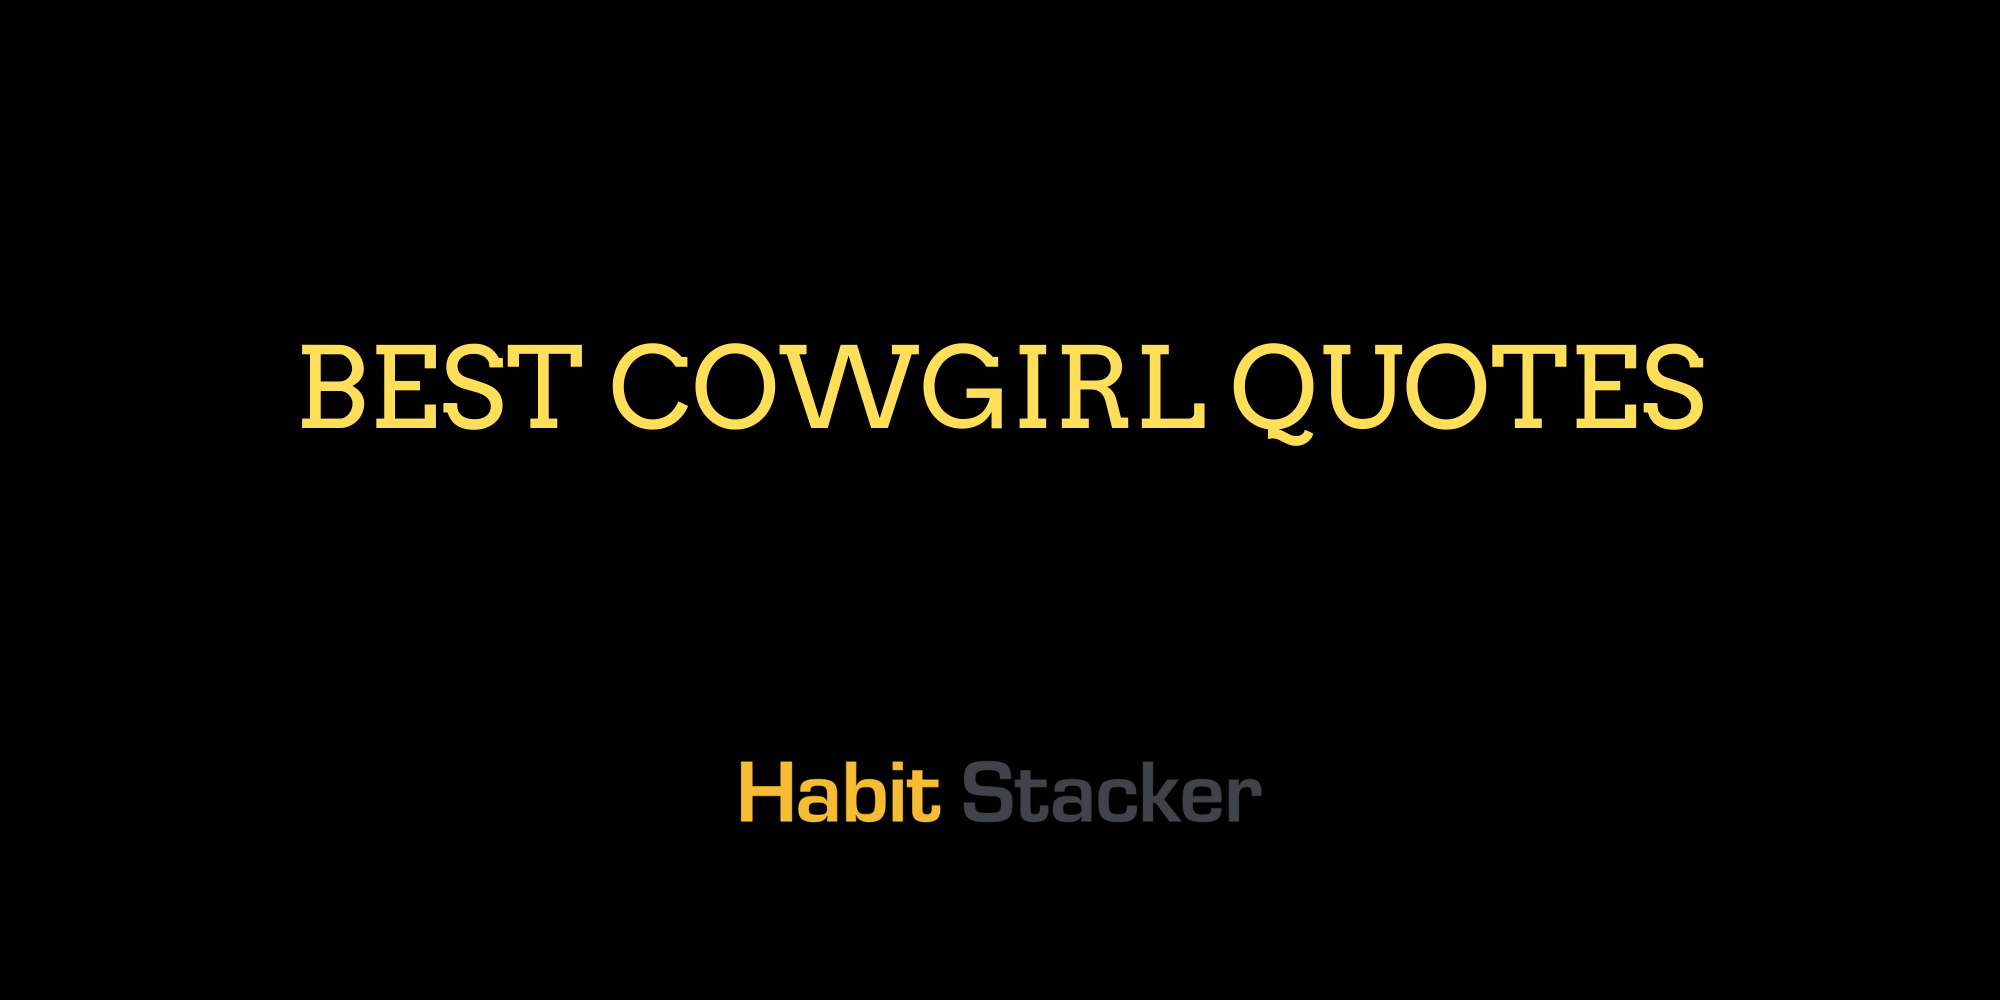 Cowgirl stacker